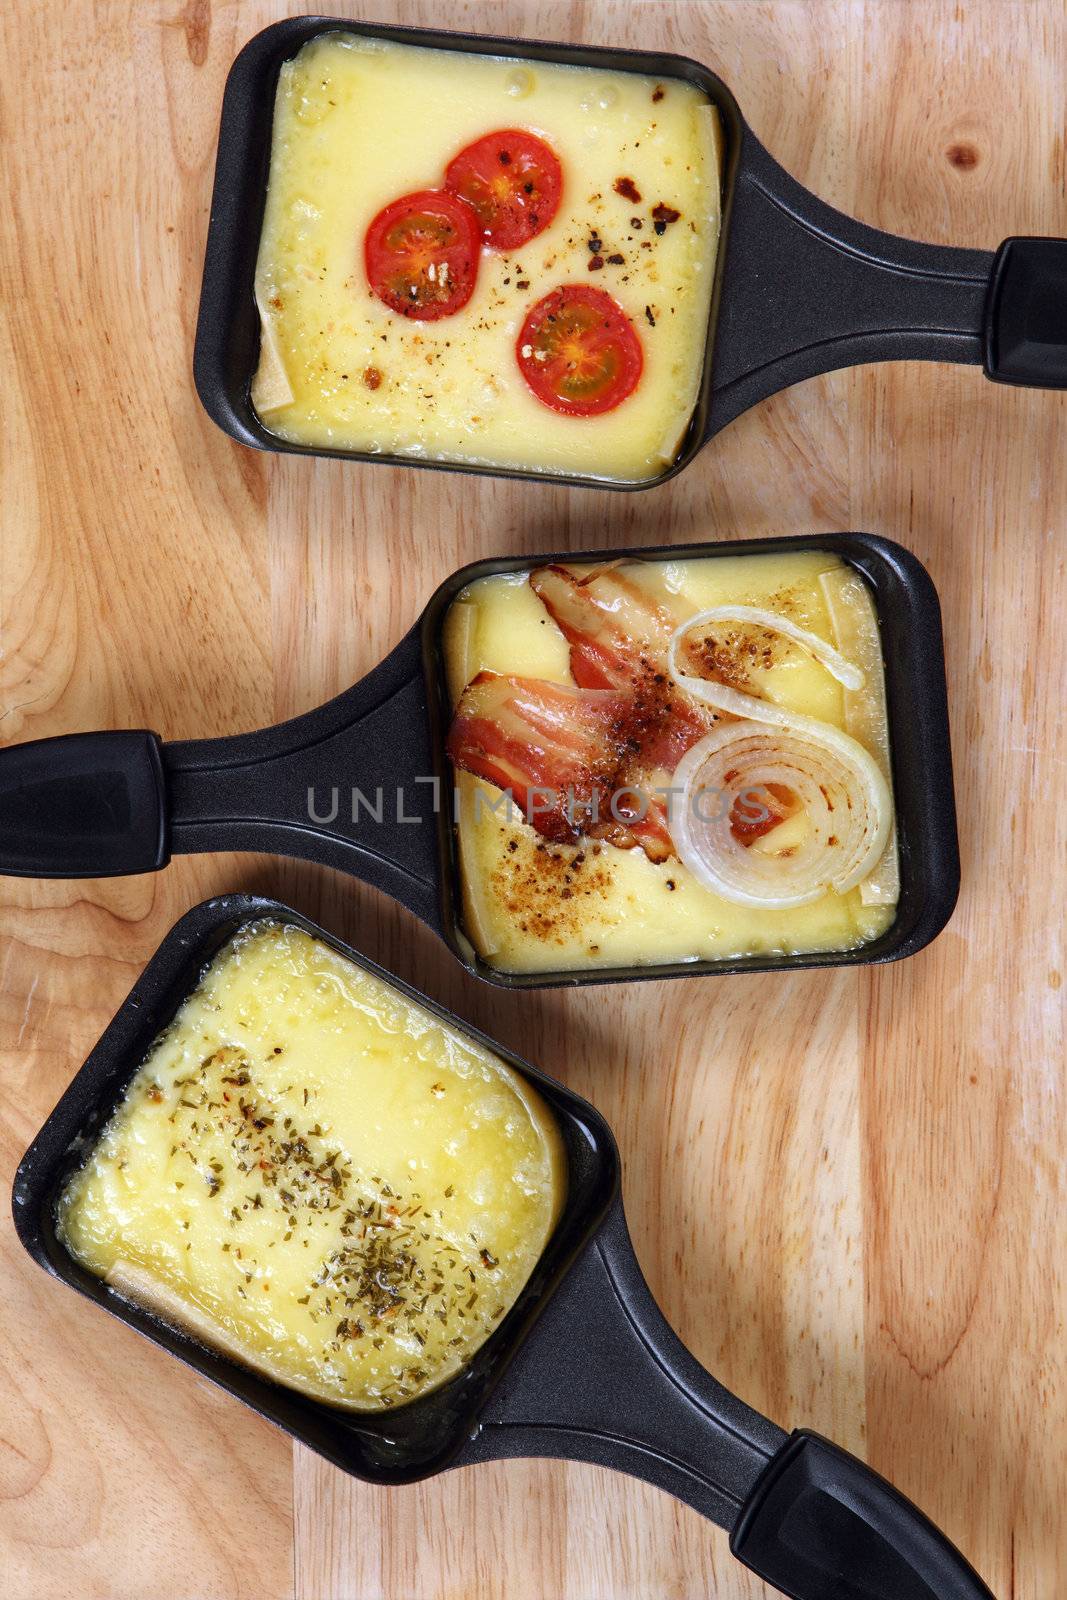 Raclette trays by sumners